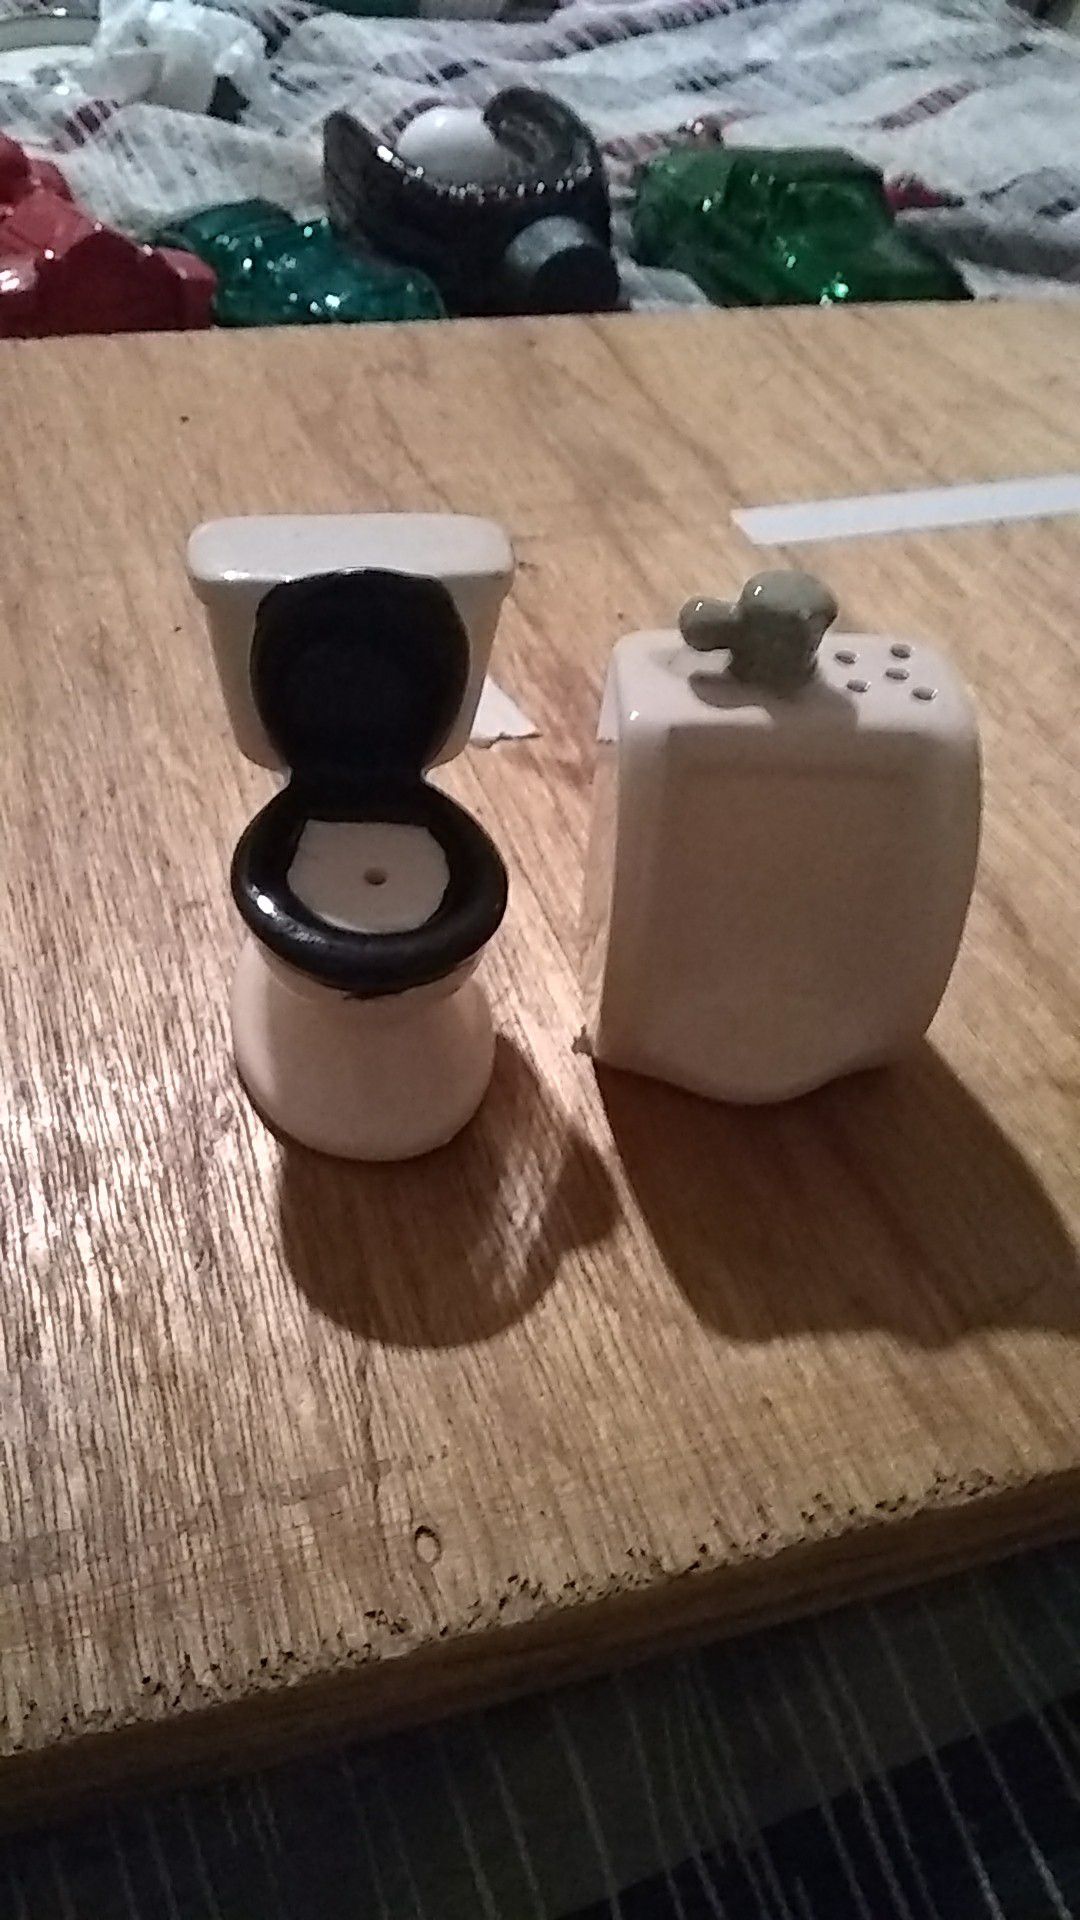 Salt and pepper shakers toilets